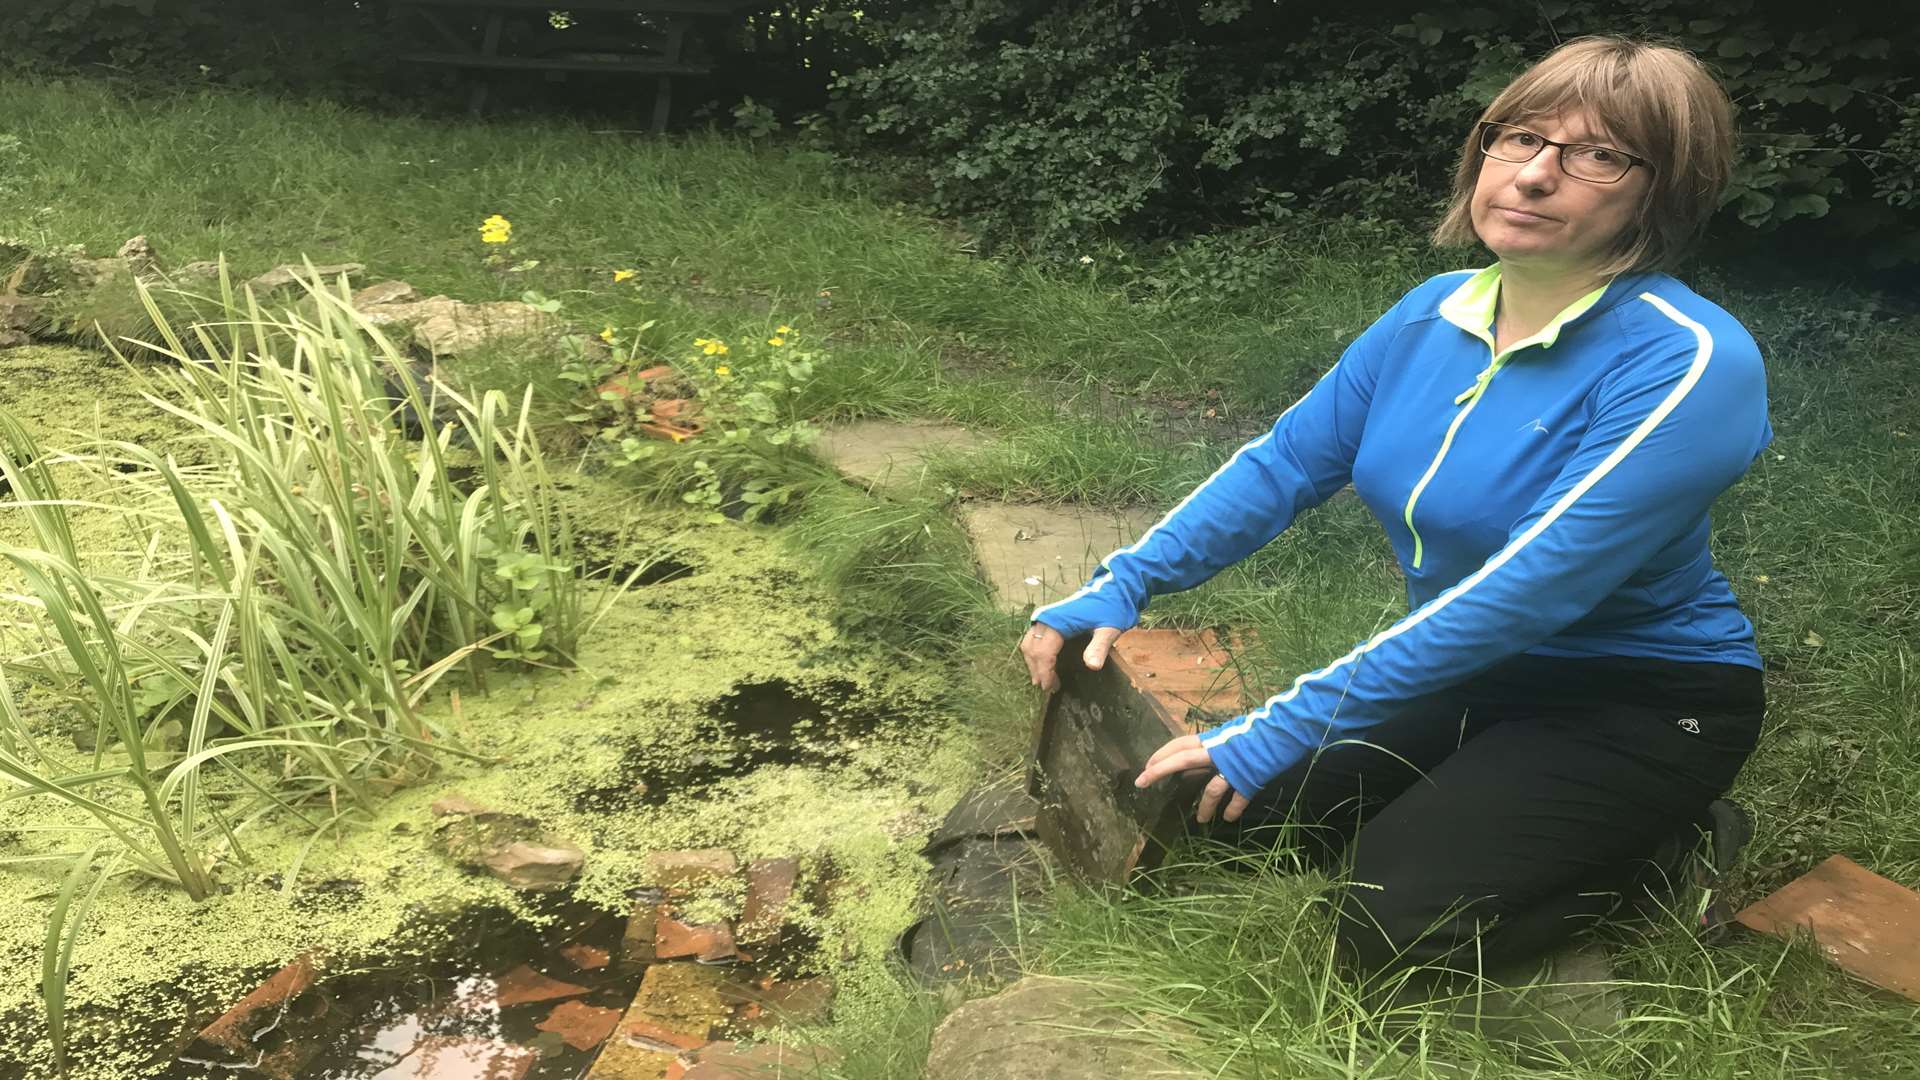 Green Zone co-ordinator Anne Collins with tiles which had been smashed in the pond